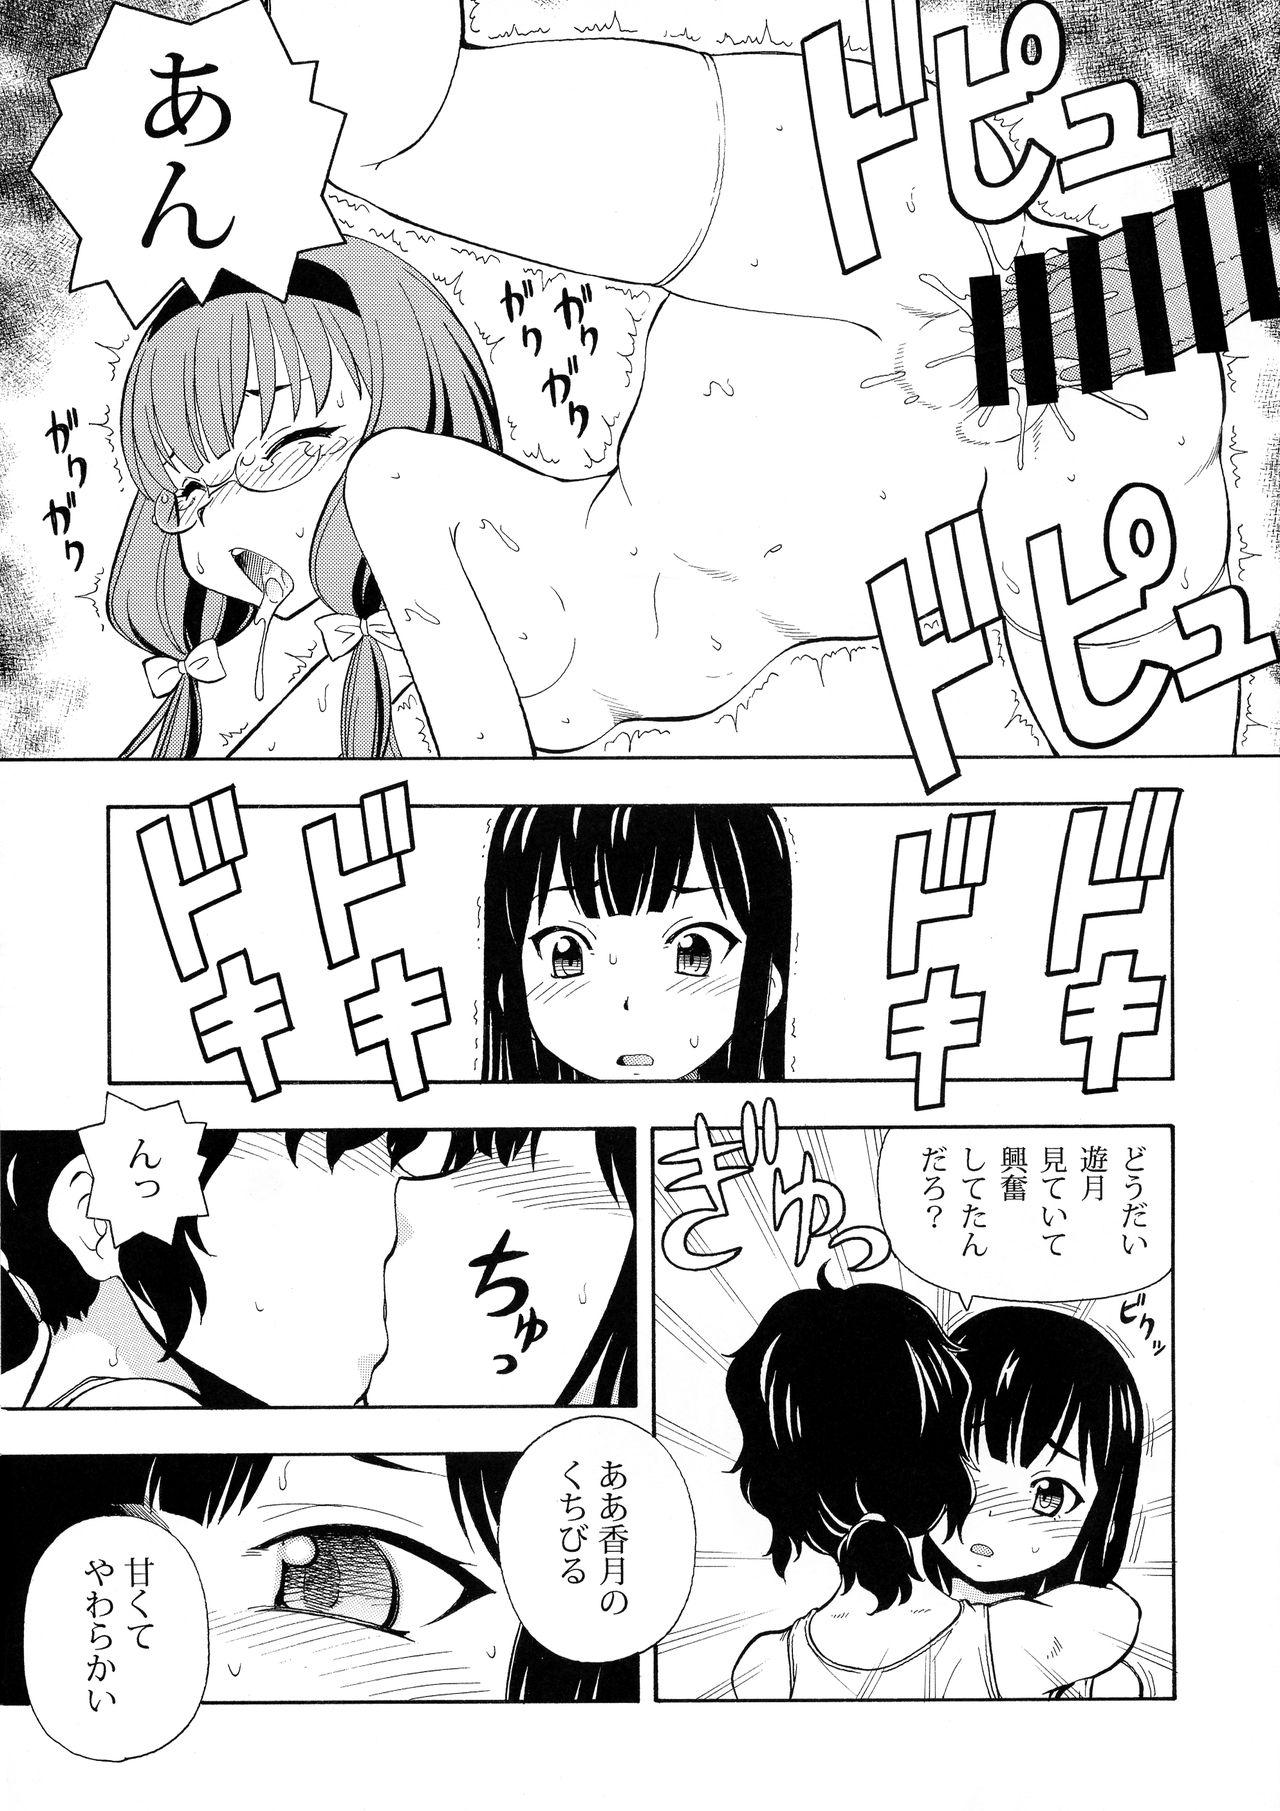 Shemale selector EROXOSS - Selector infected wixoss Twinks - Page 7